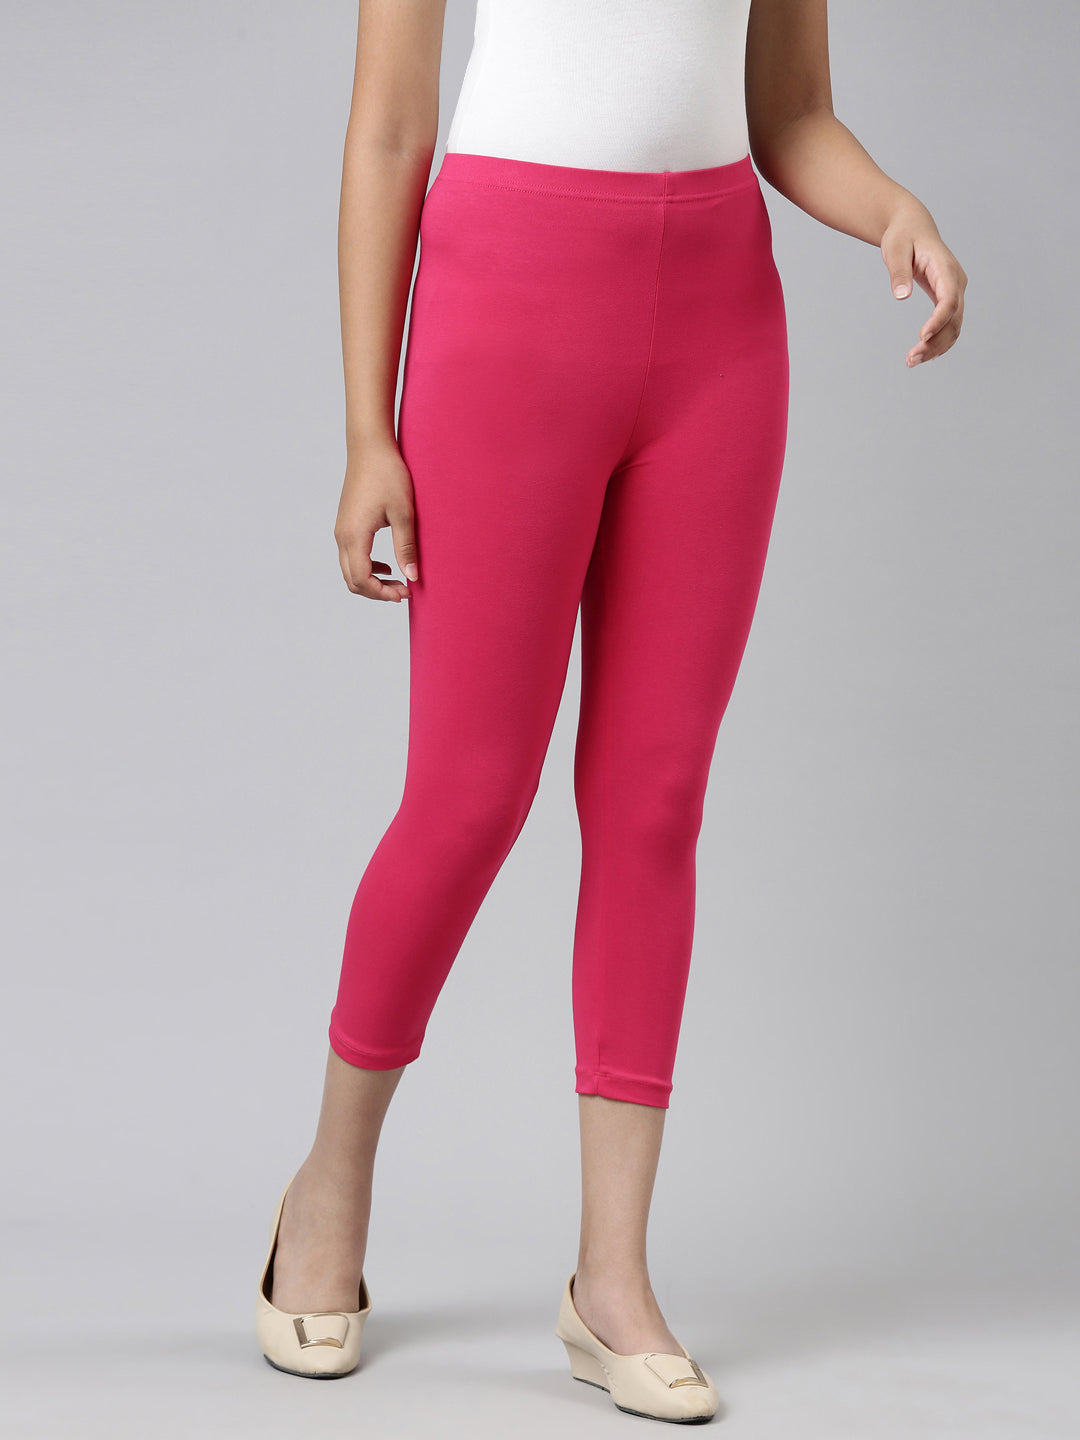 Buy GO COLORS Wheat Womens Solid Leggings | Shoppers Stop